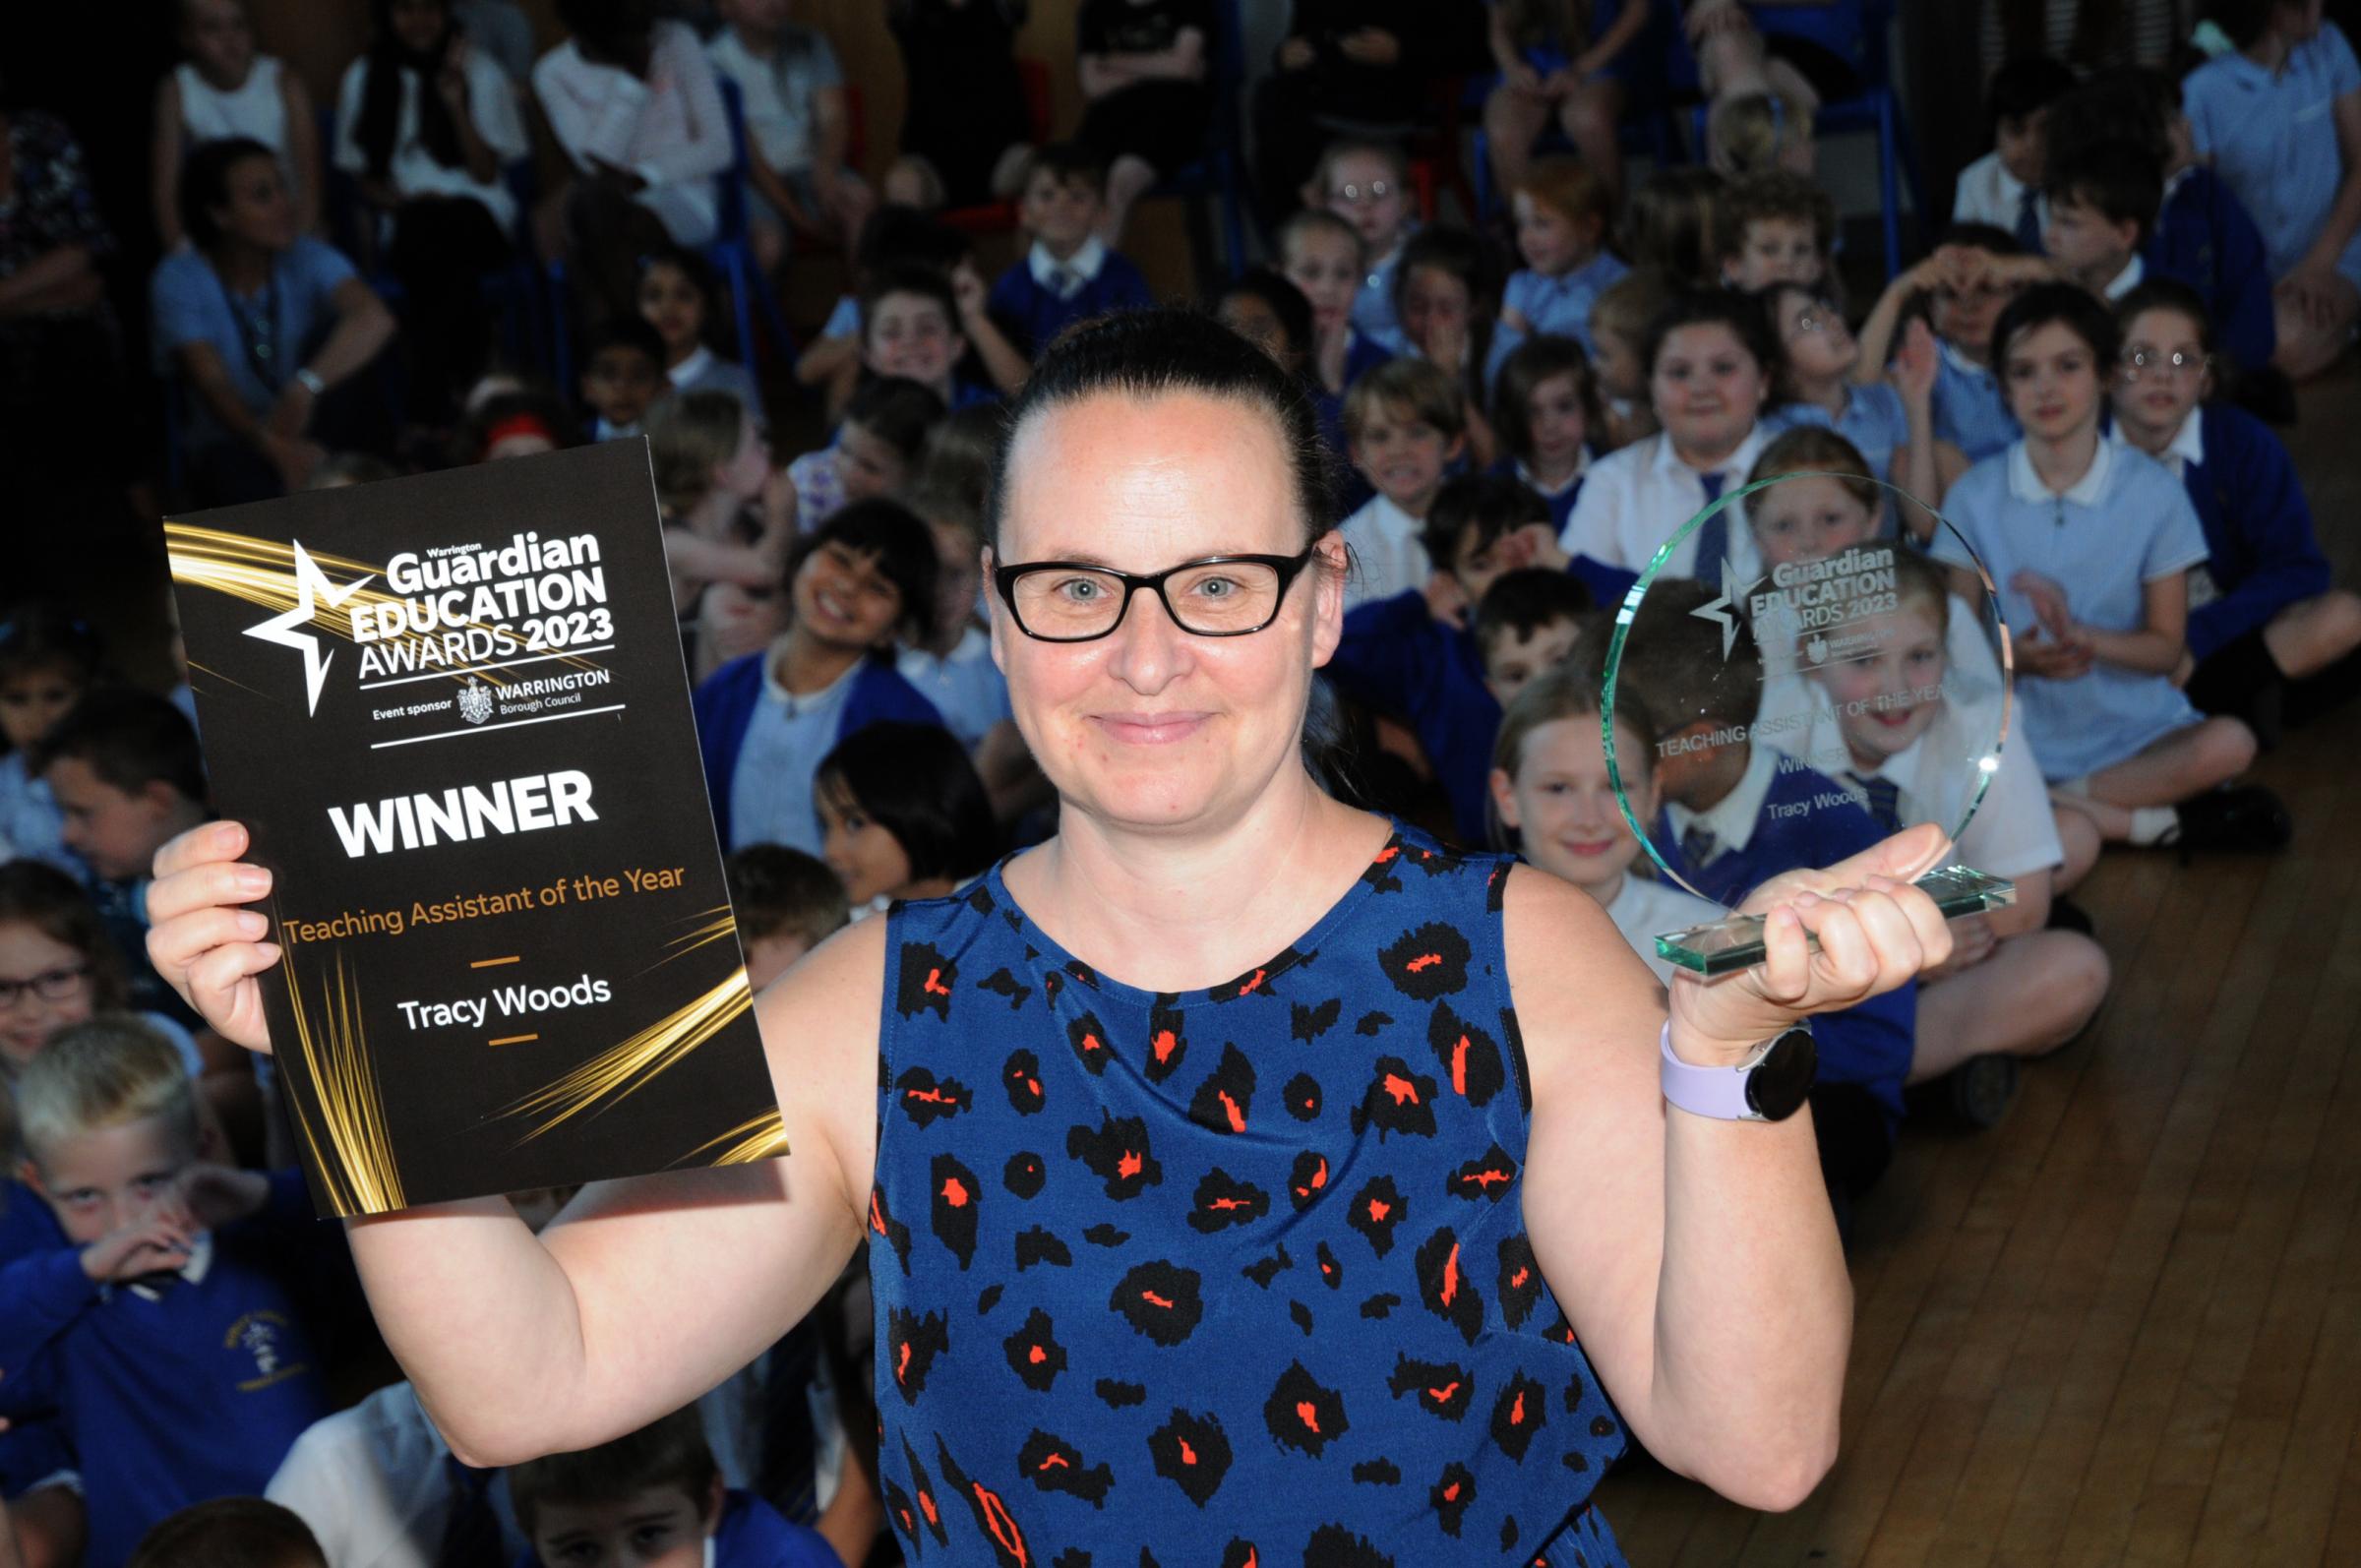 Teaching Assistant of the Year - Tracey Woods